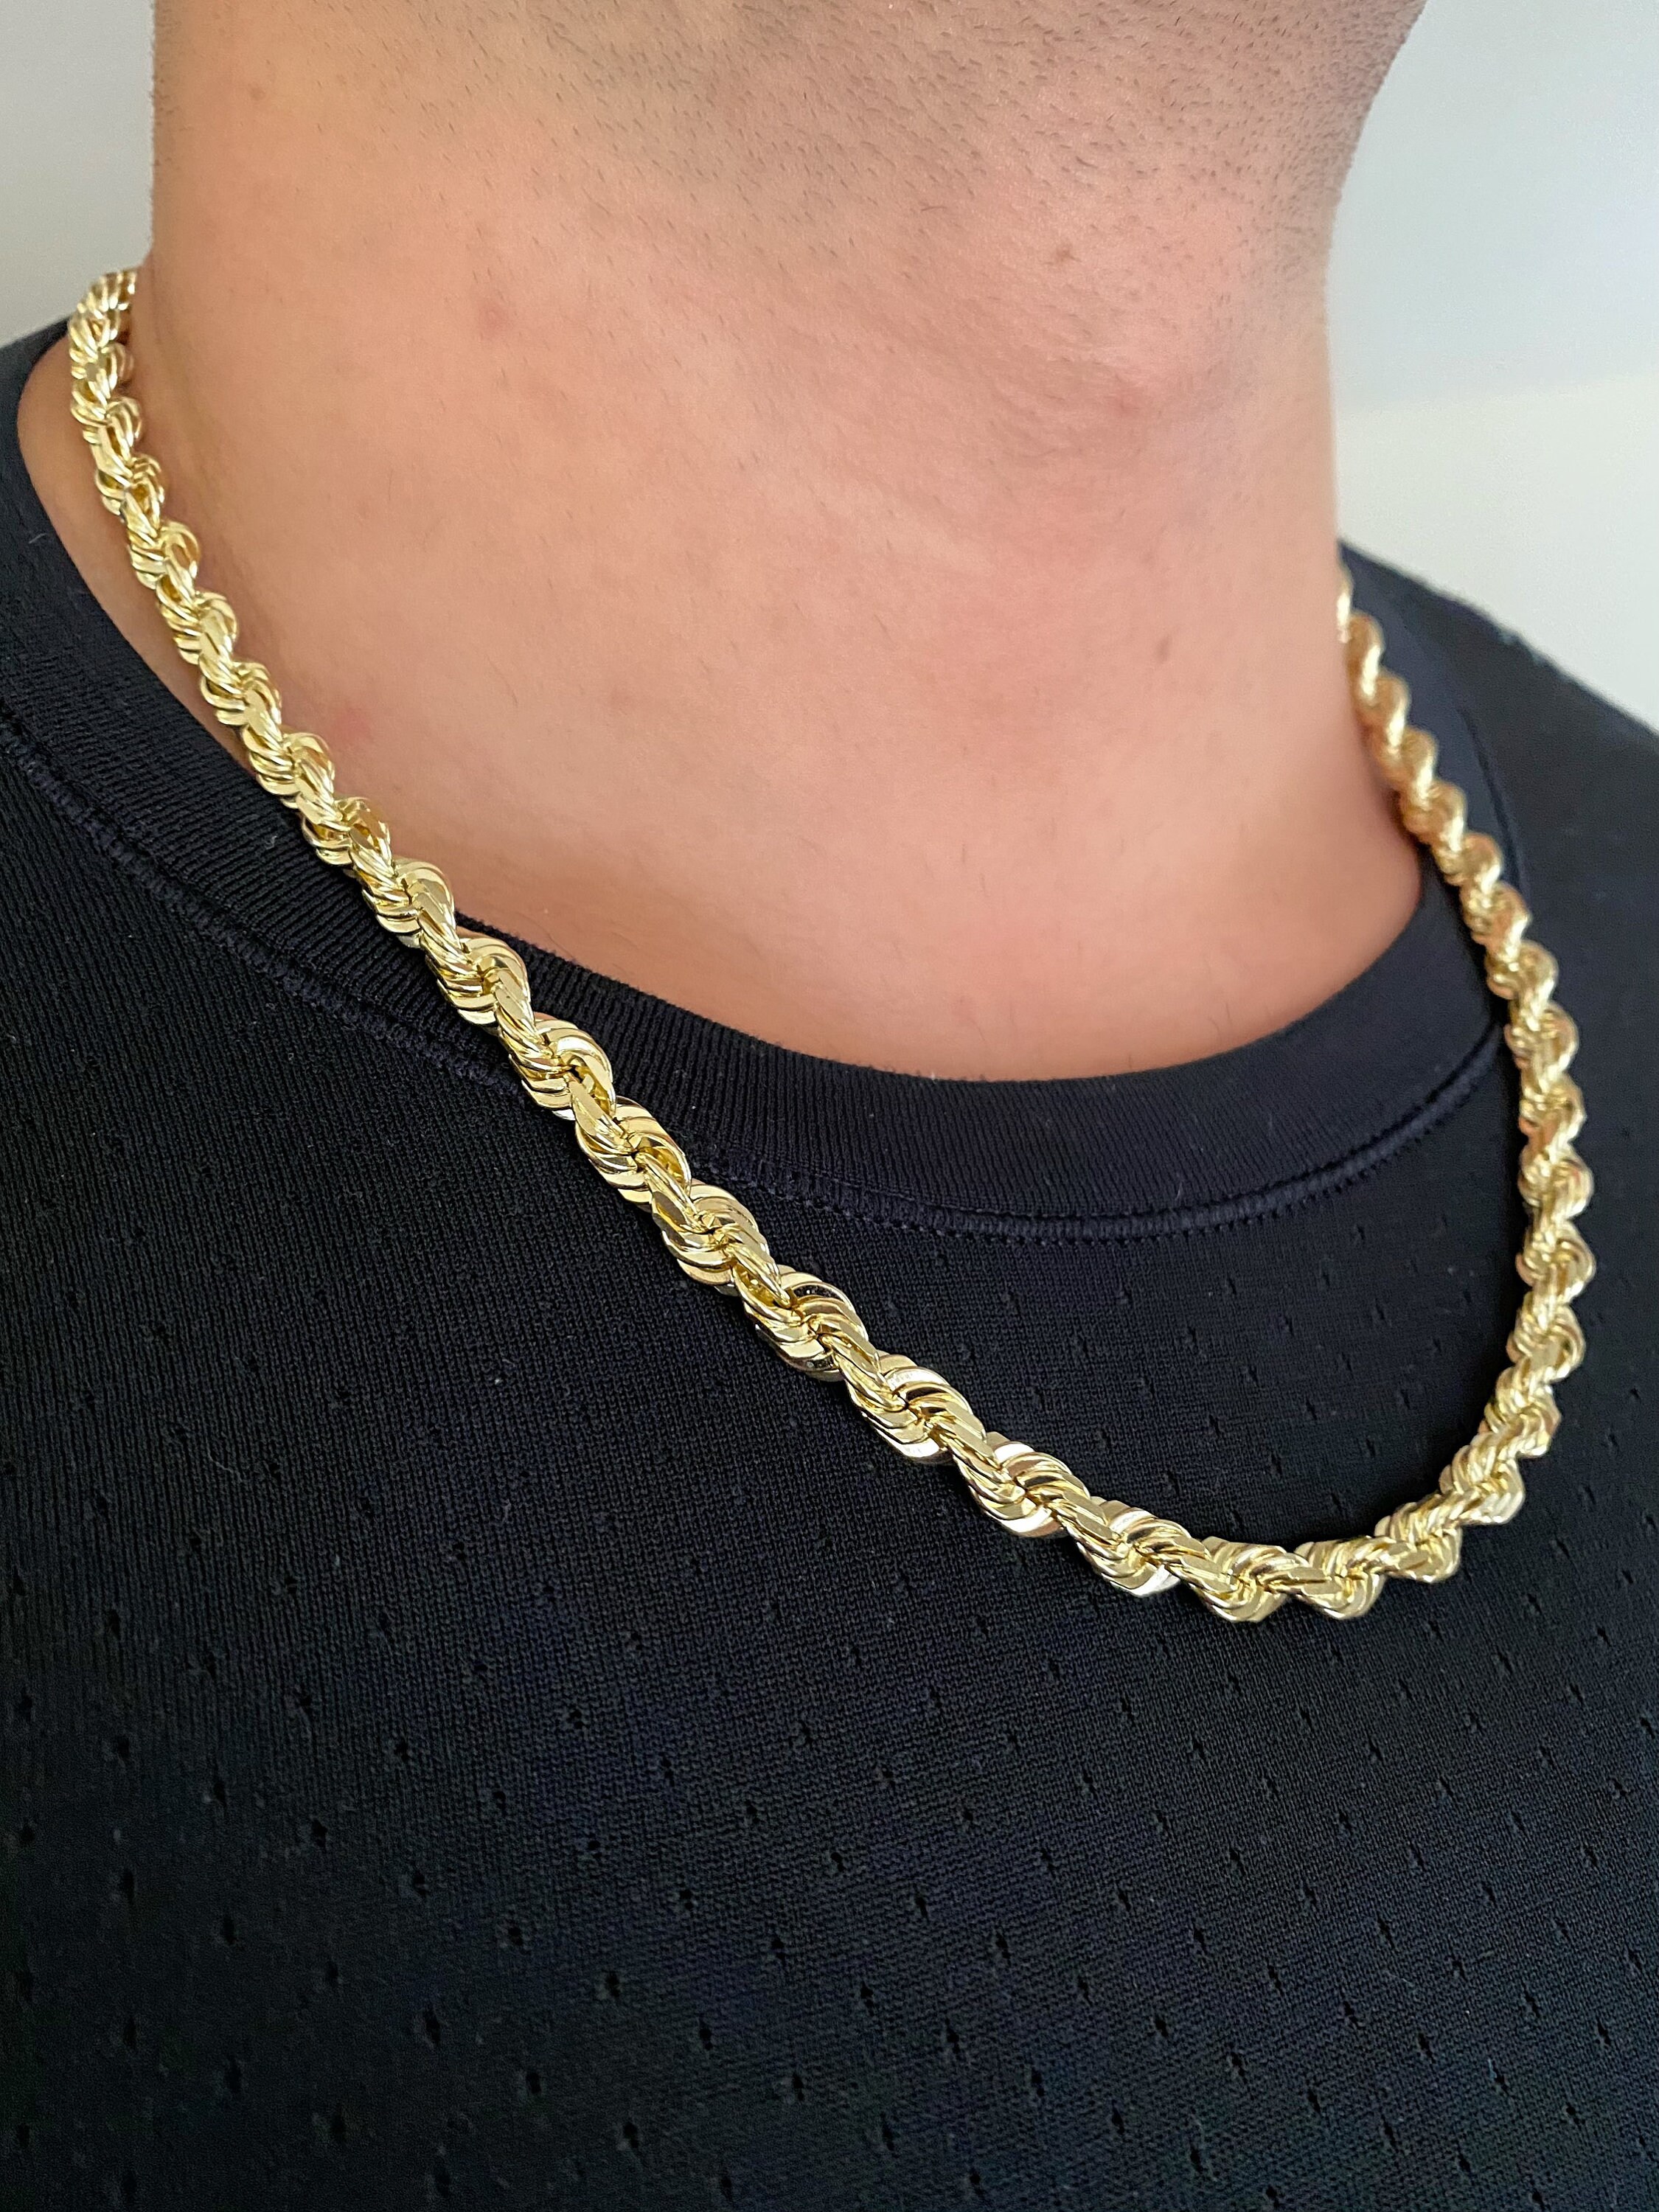 14k 8mm Solid Gold Rope Chain. Thick Heavy Solid Rope Chain